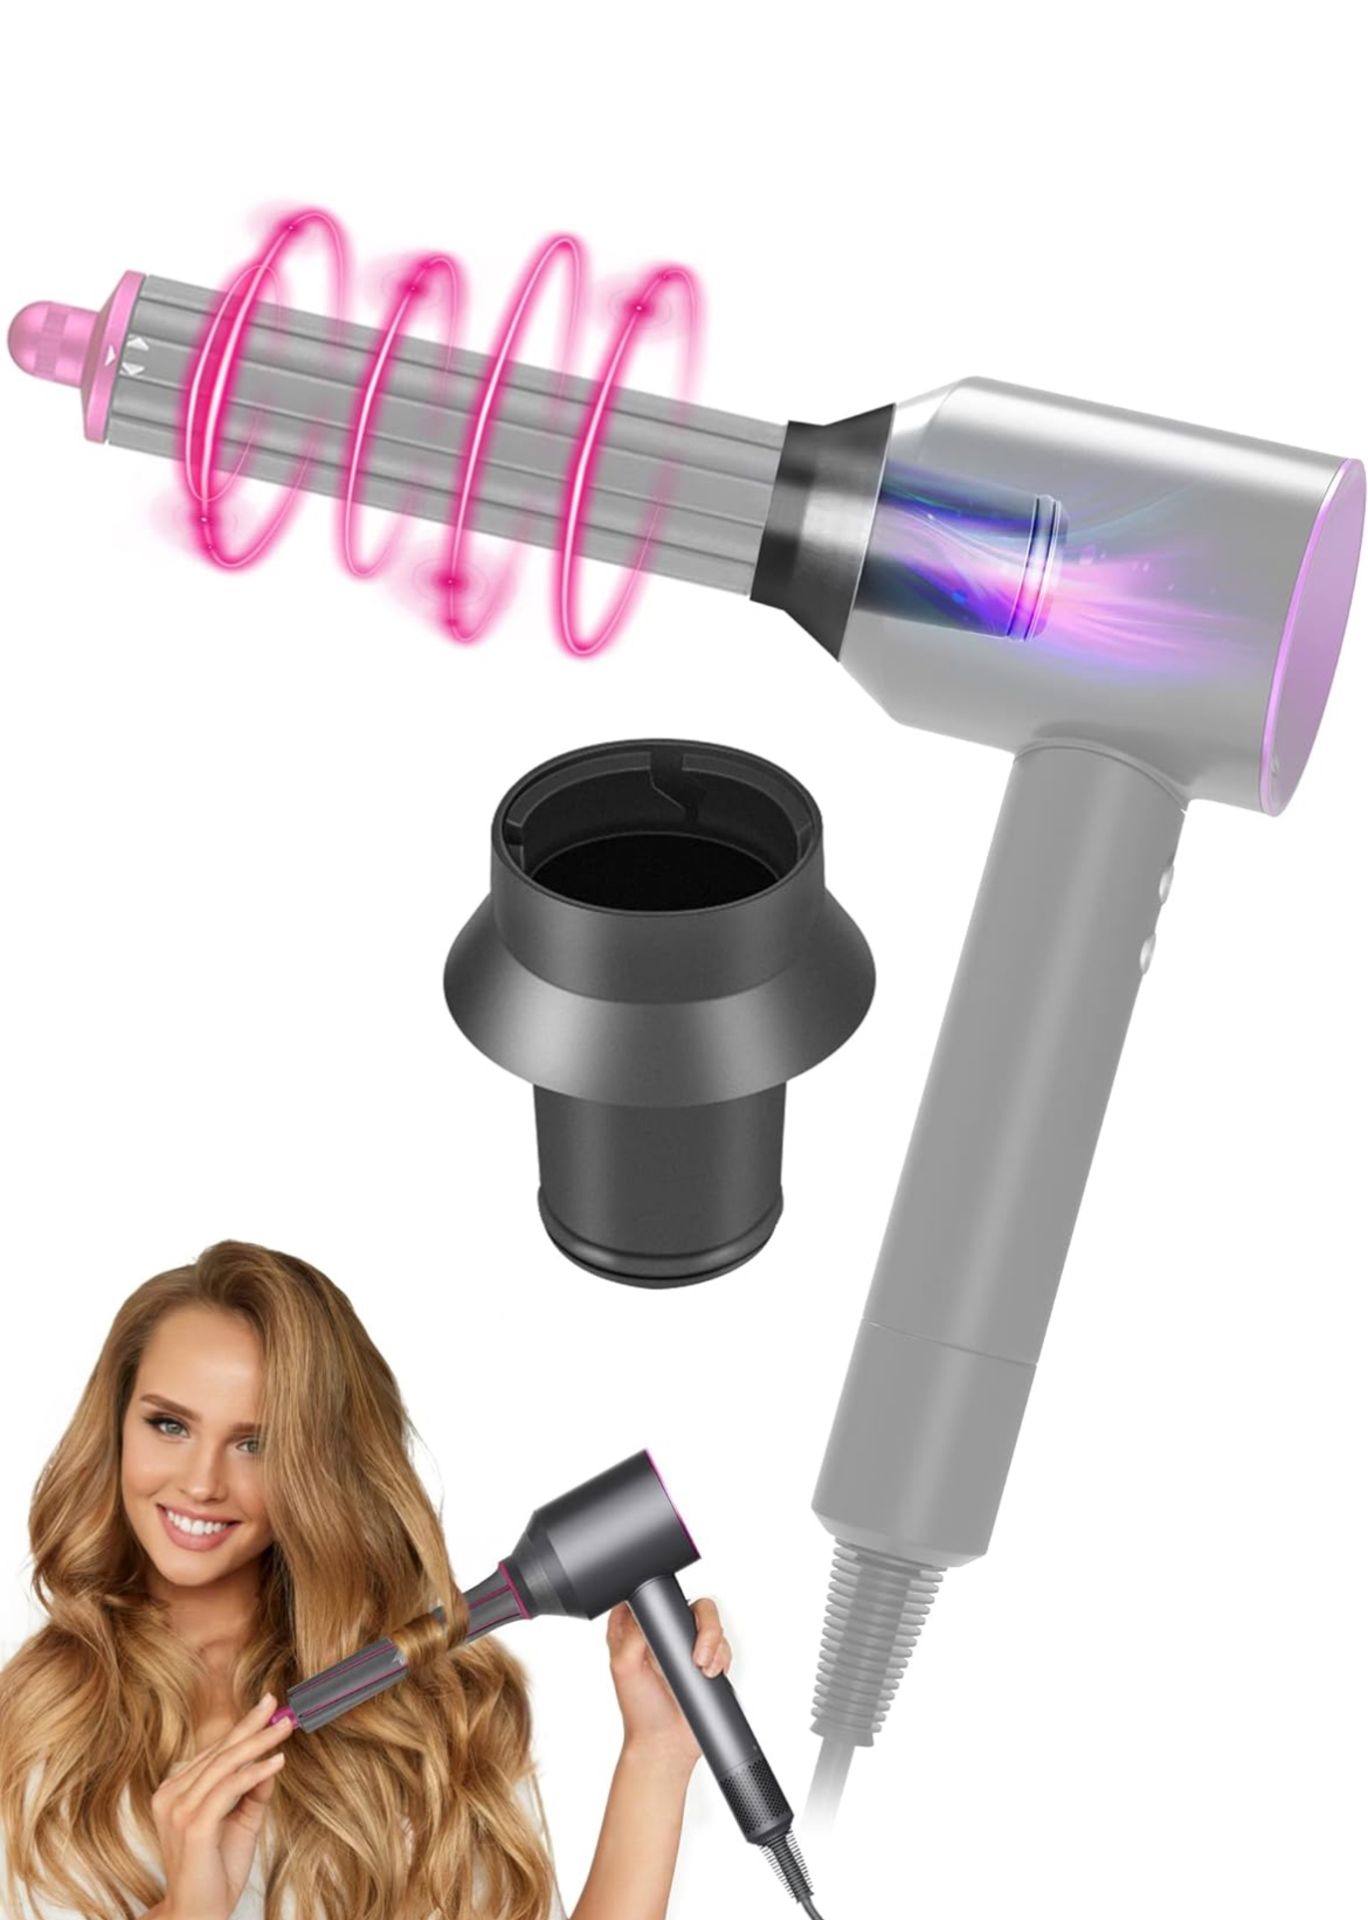 15x LOCINTE Multifunctional 2 in 1 Hairdryer Accessory, Compatible With Dyson Supersonic